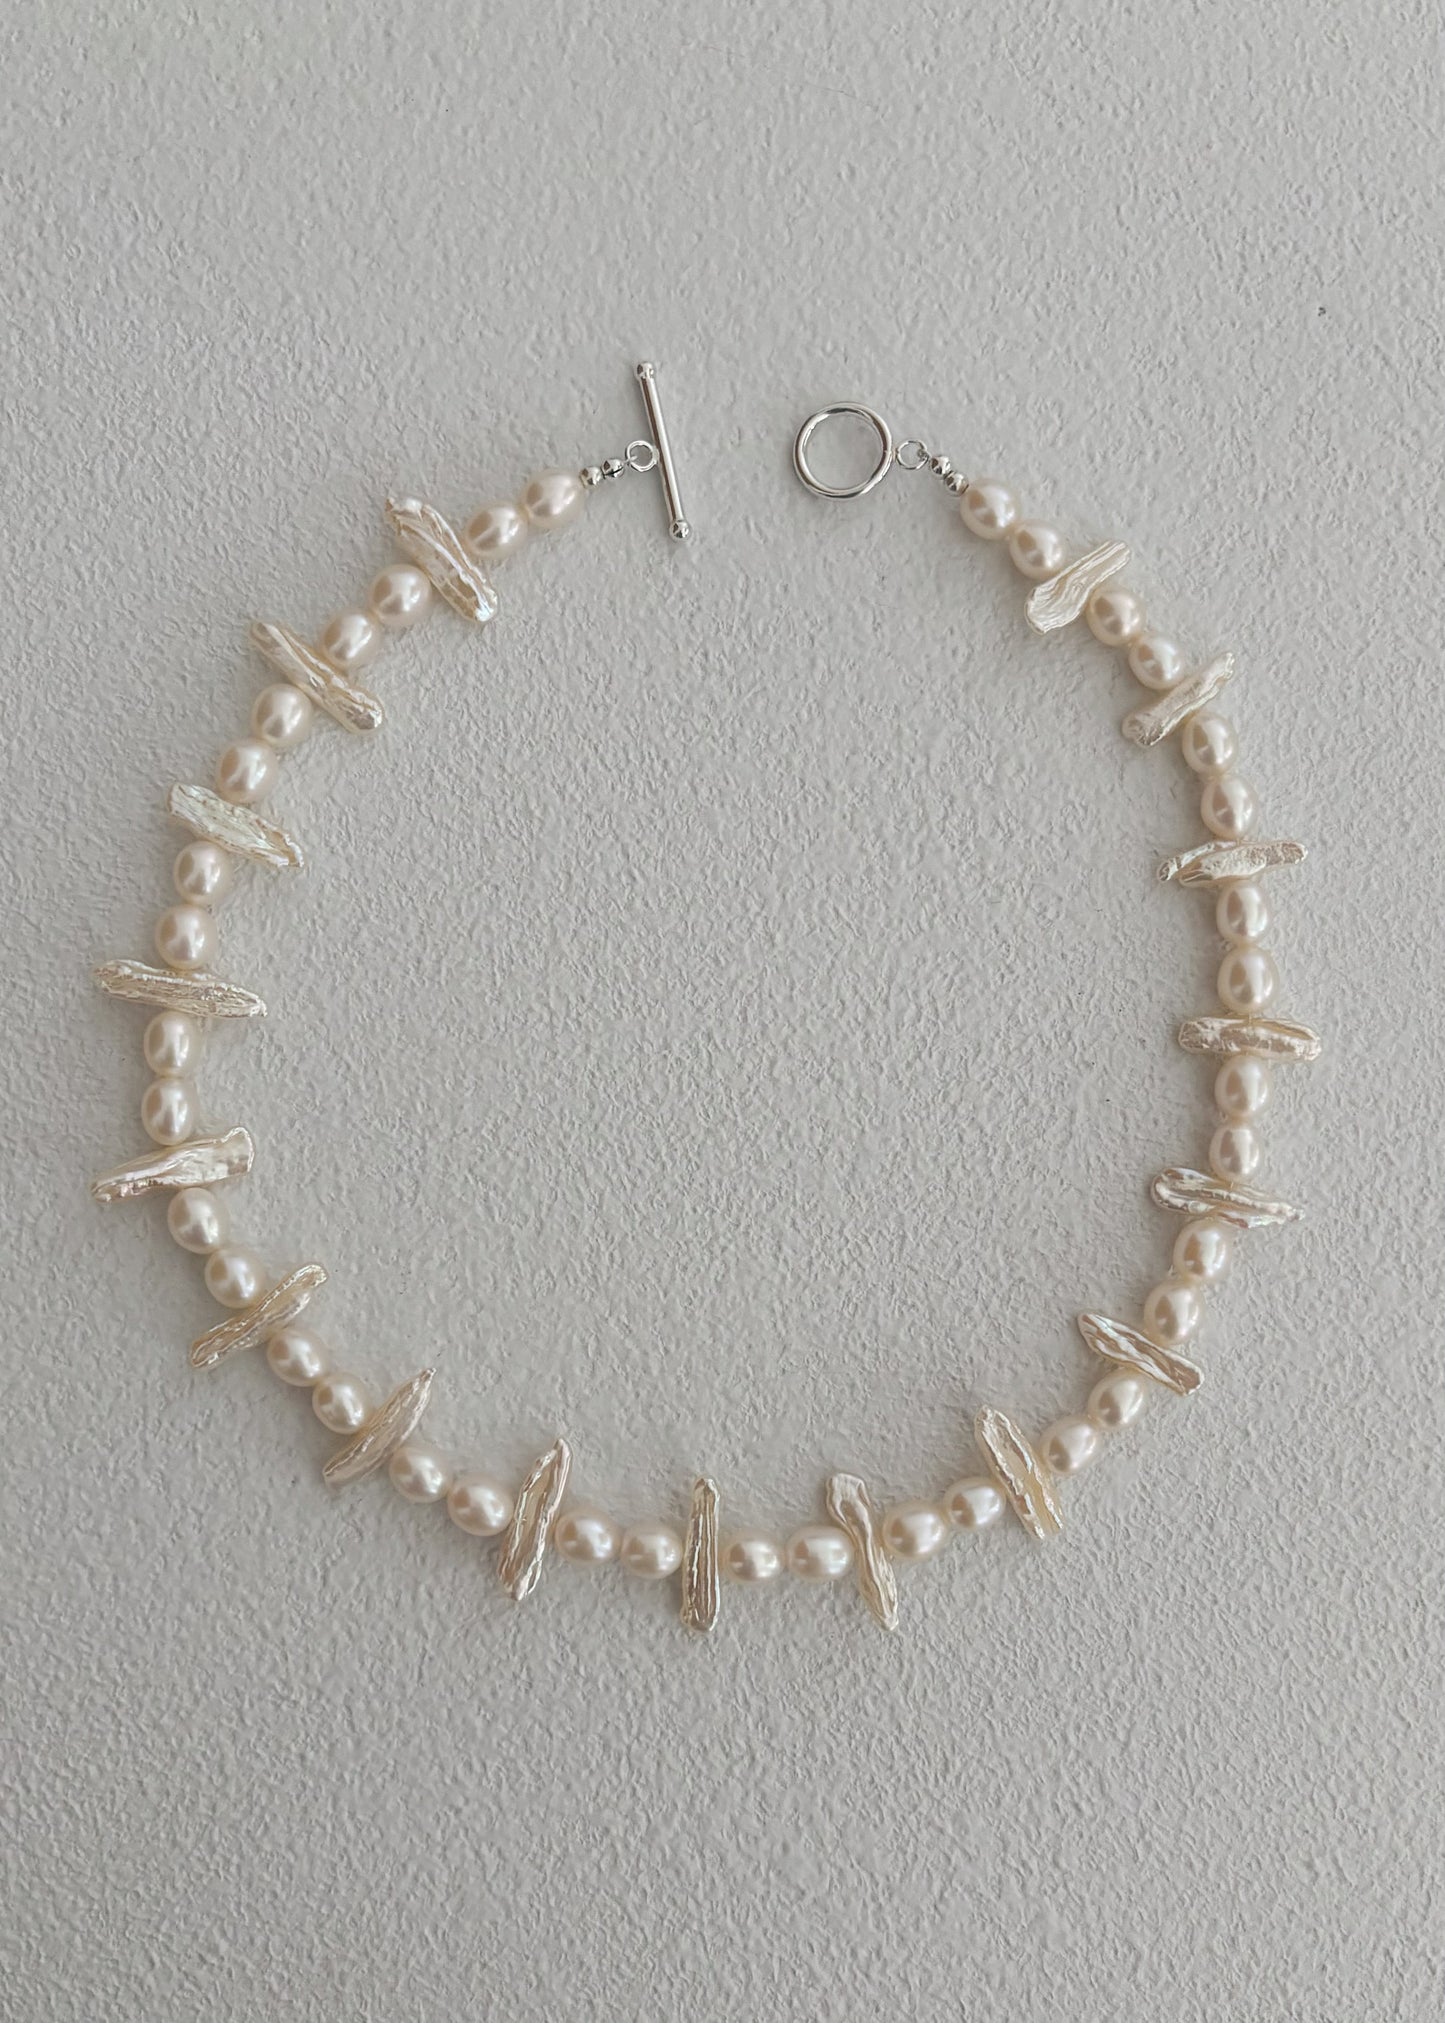 Matera pearl necklace